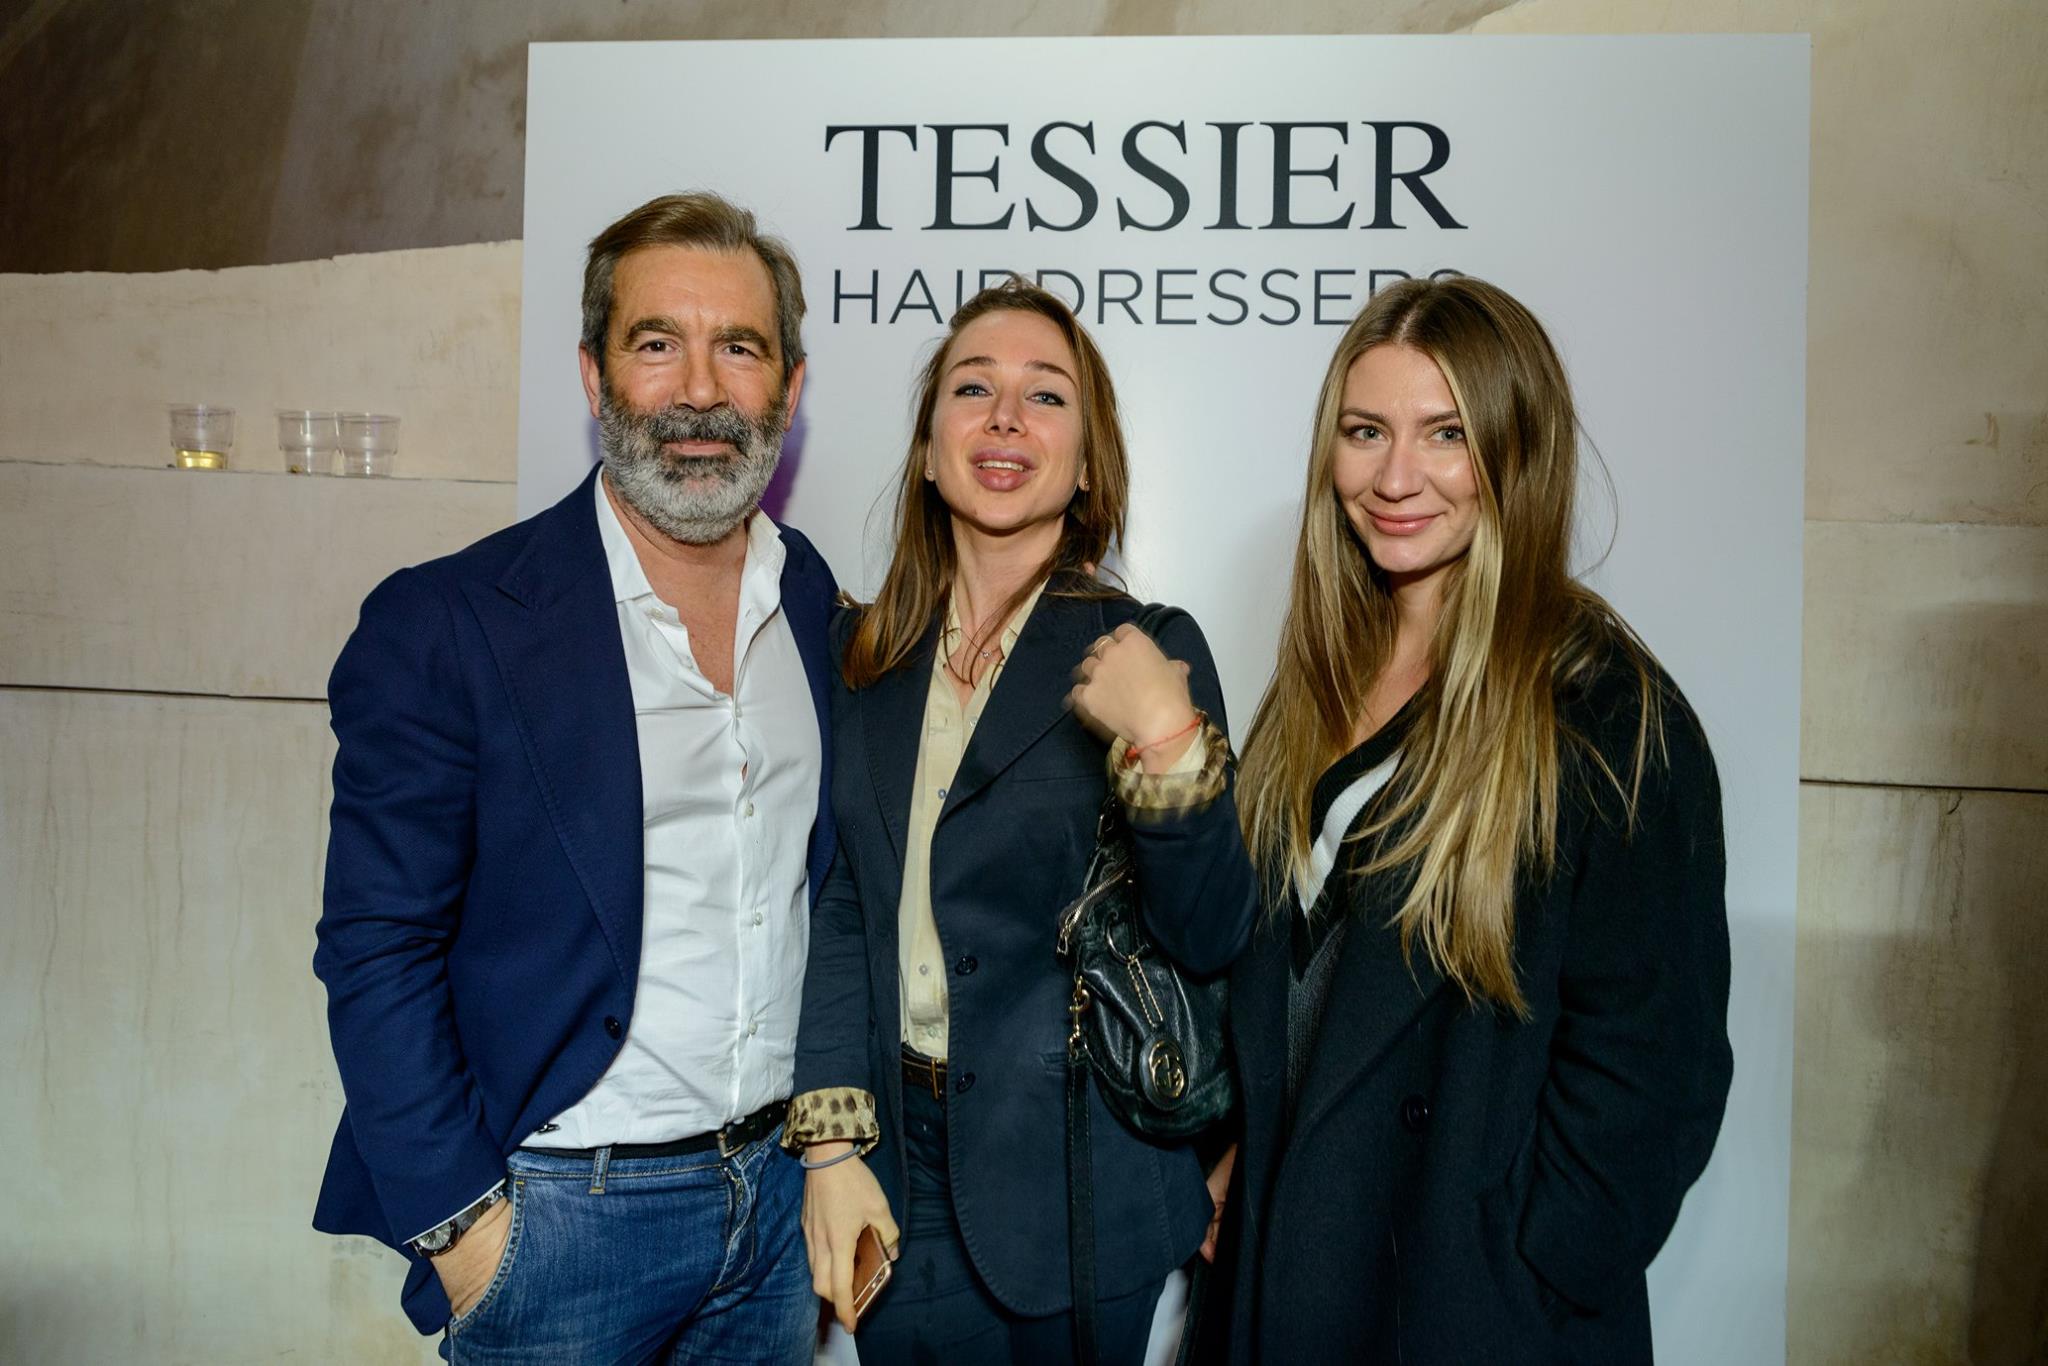 tessier-hairdressers-events